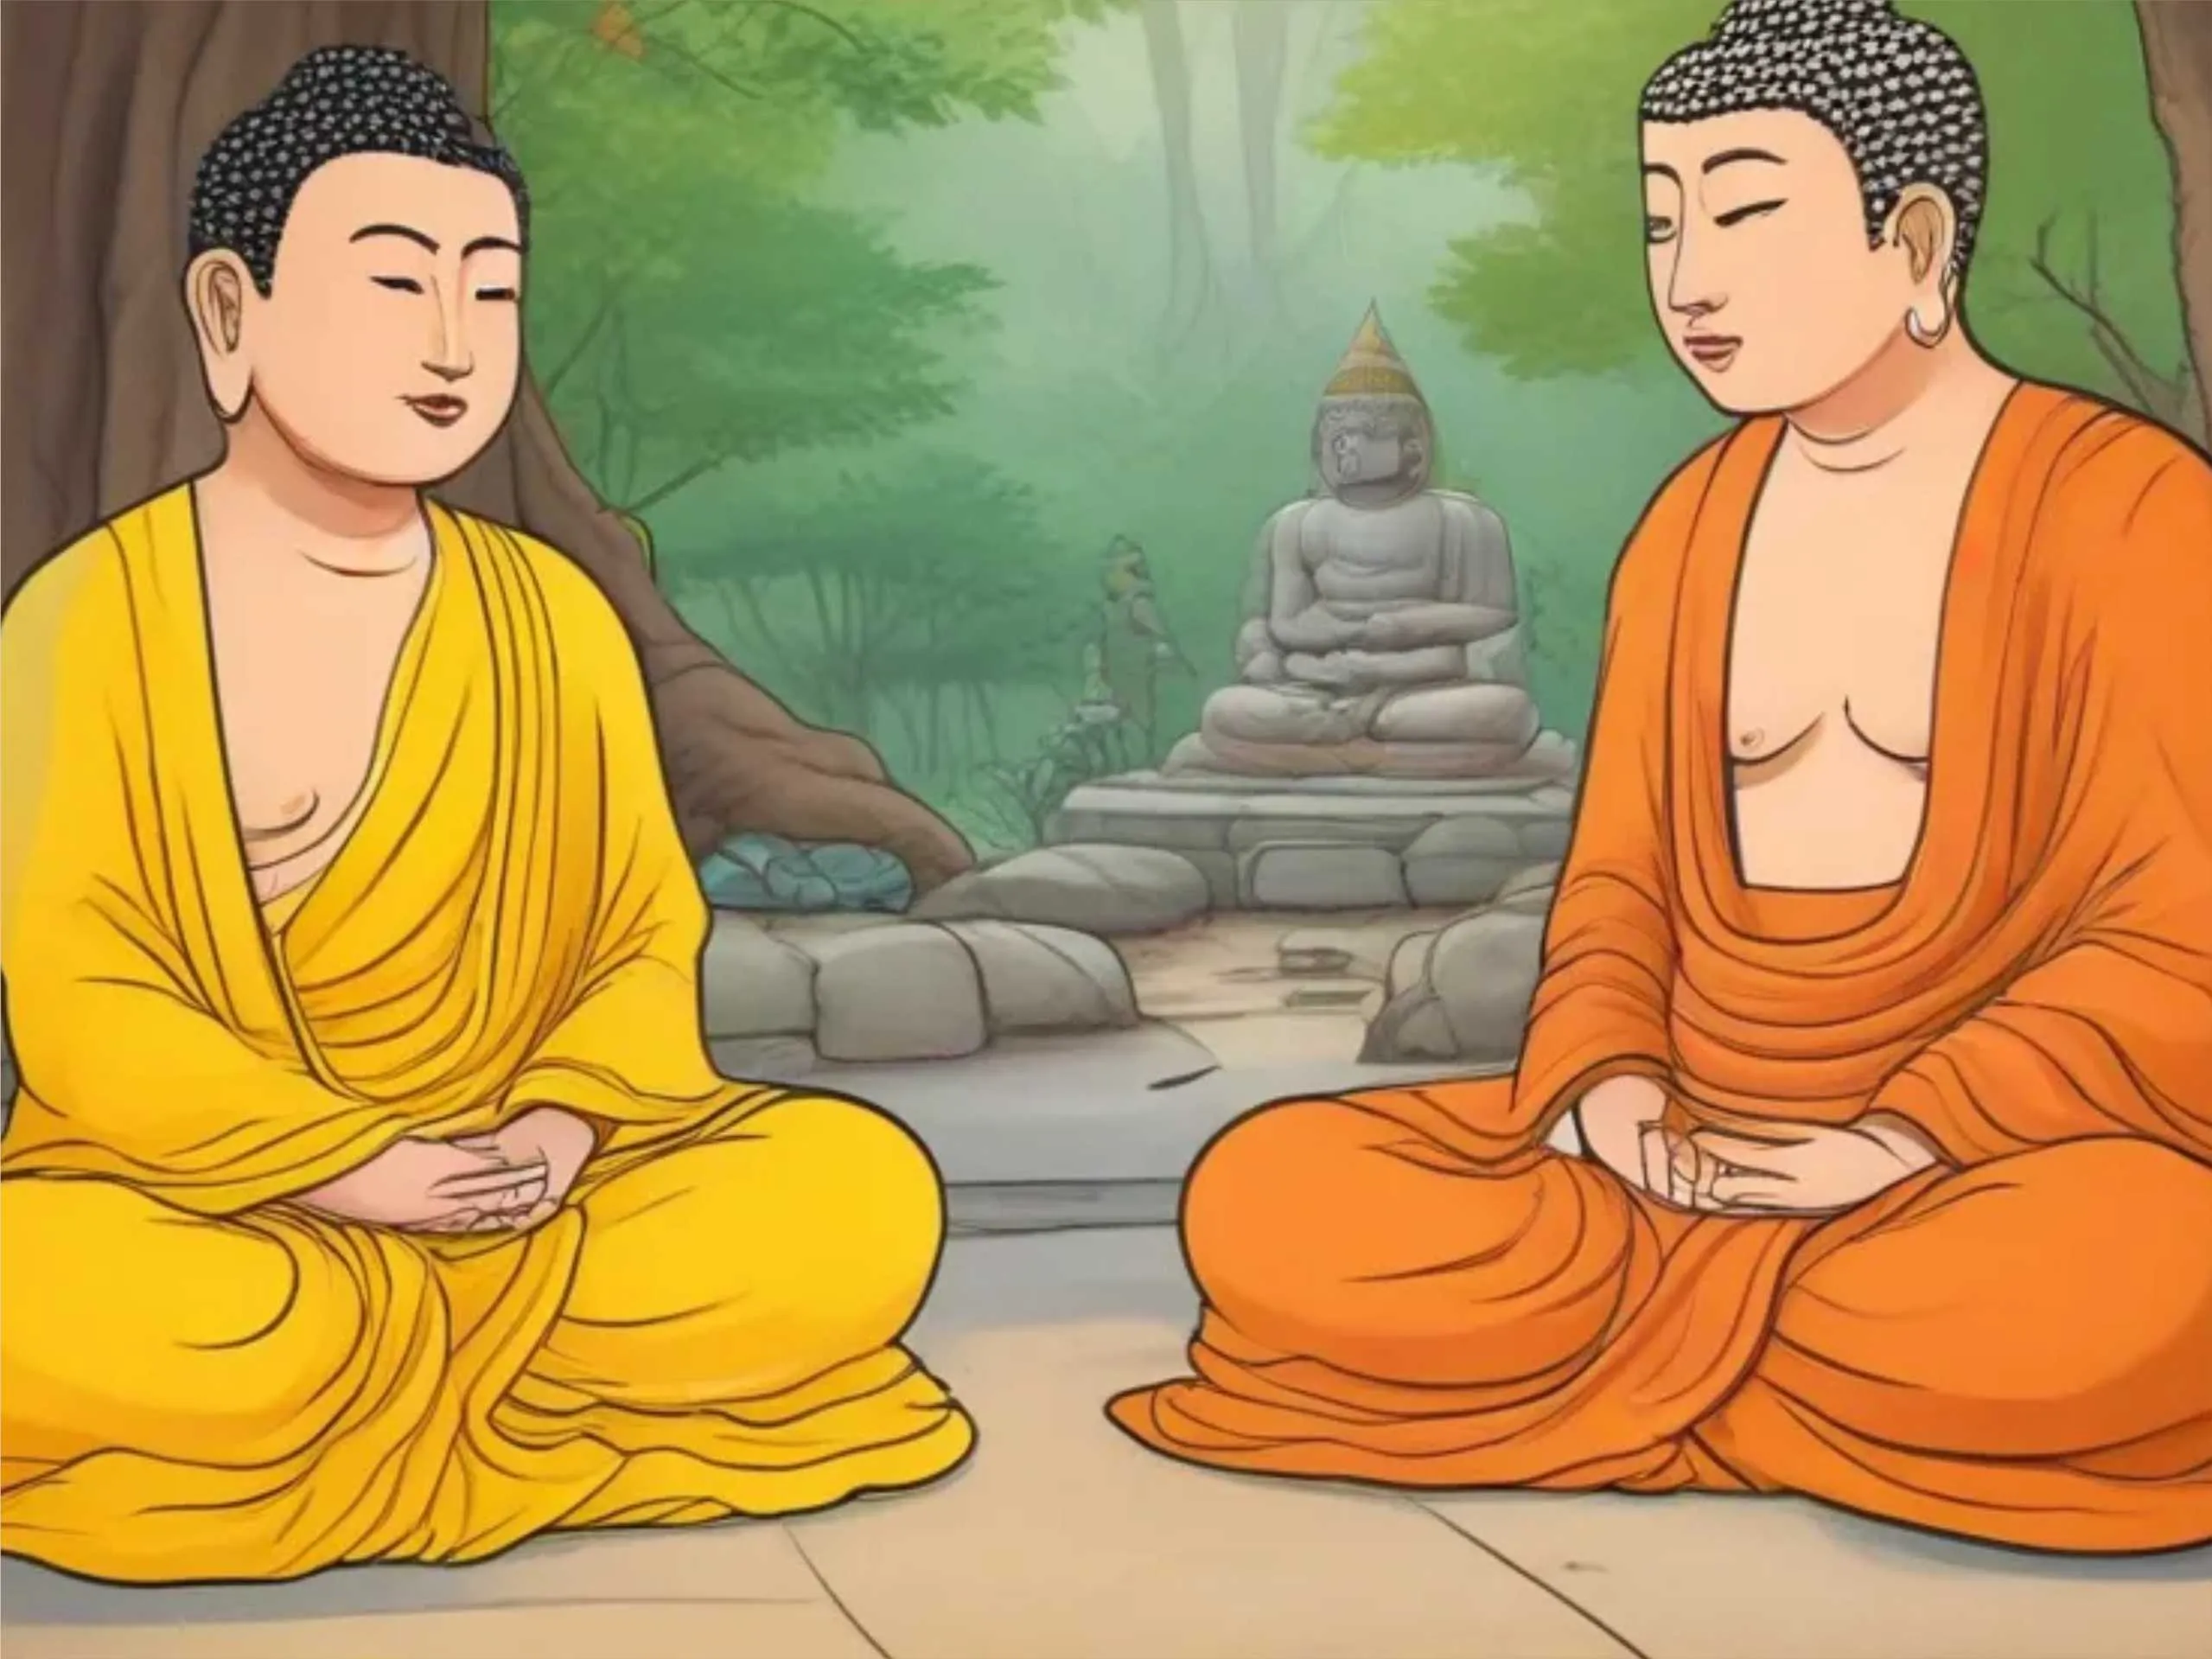 Lord Buddha with his disciple